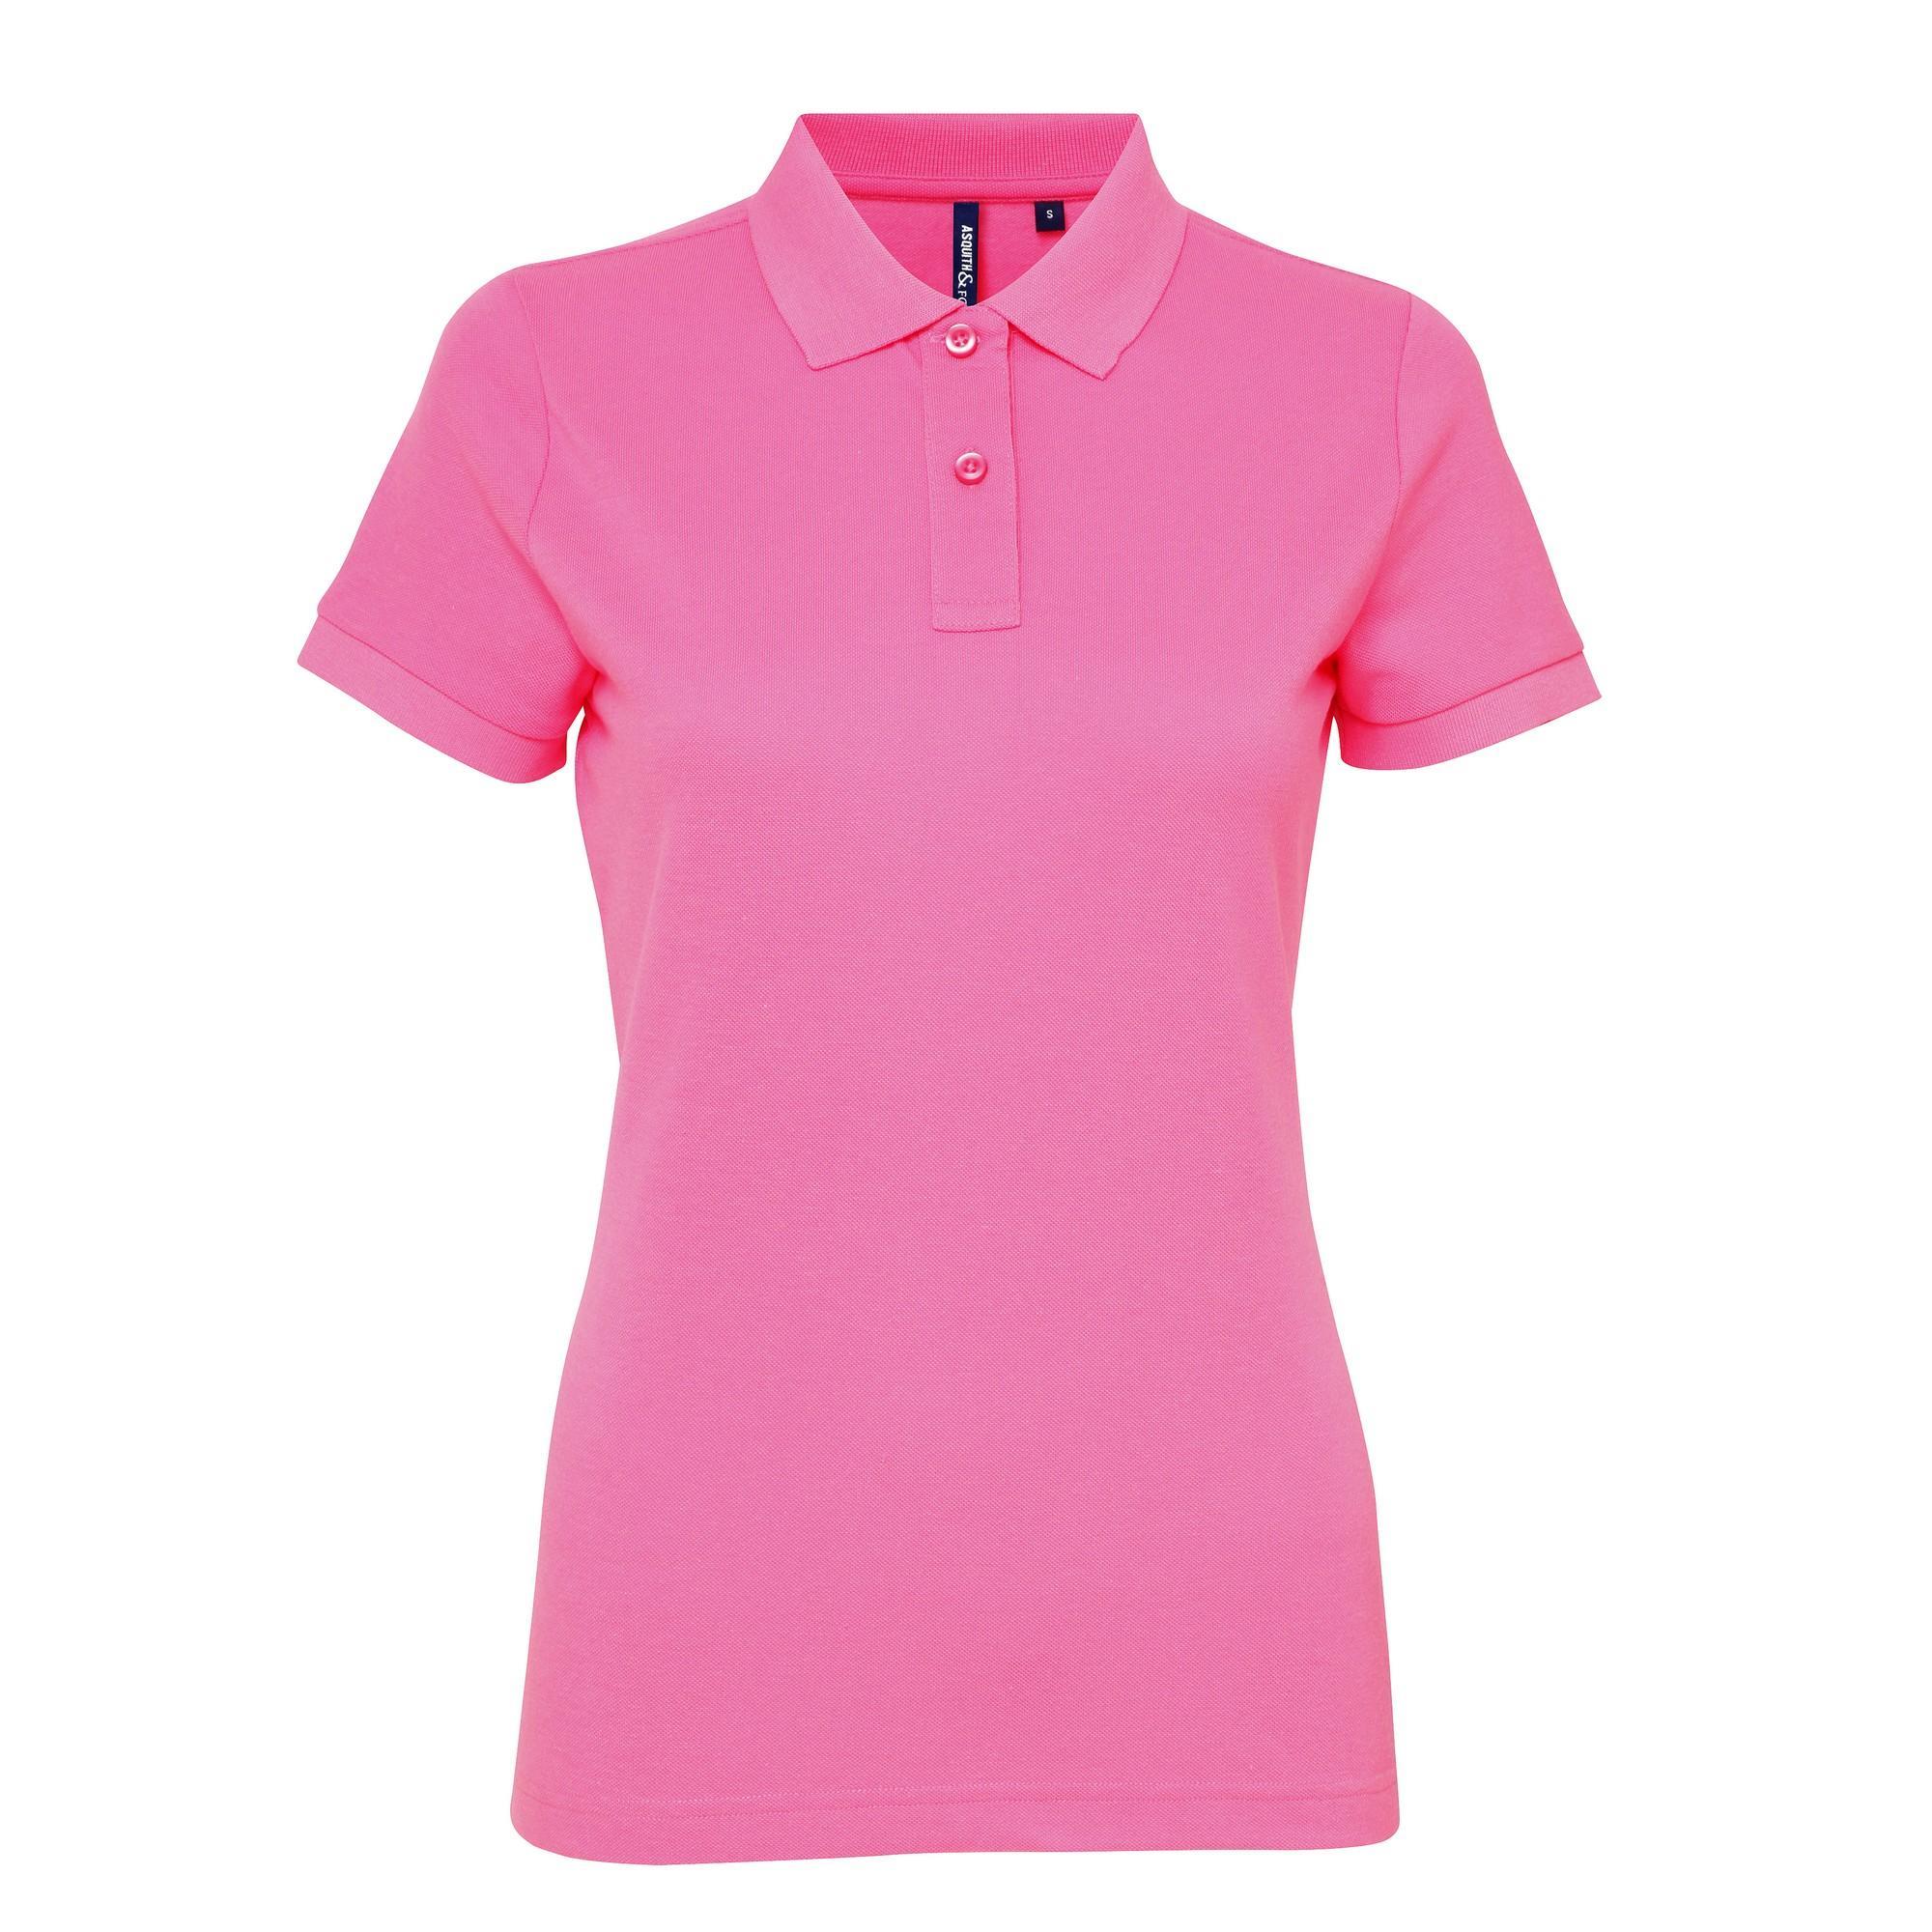 Asquith & Fox Womens/Ladies Short Sleeve Performance Blend Polo Shirt (Neon Pink) (L)